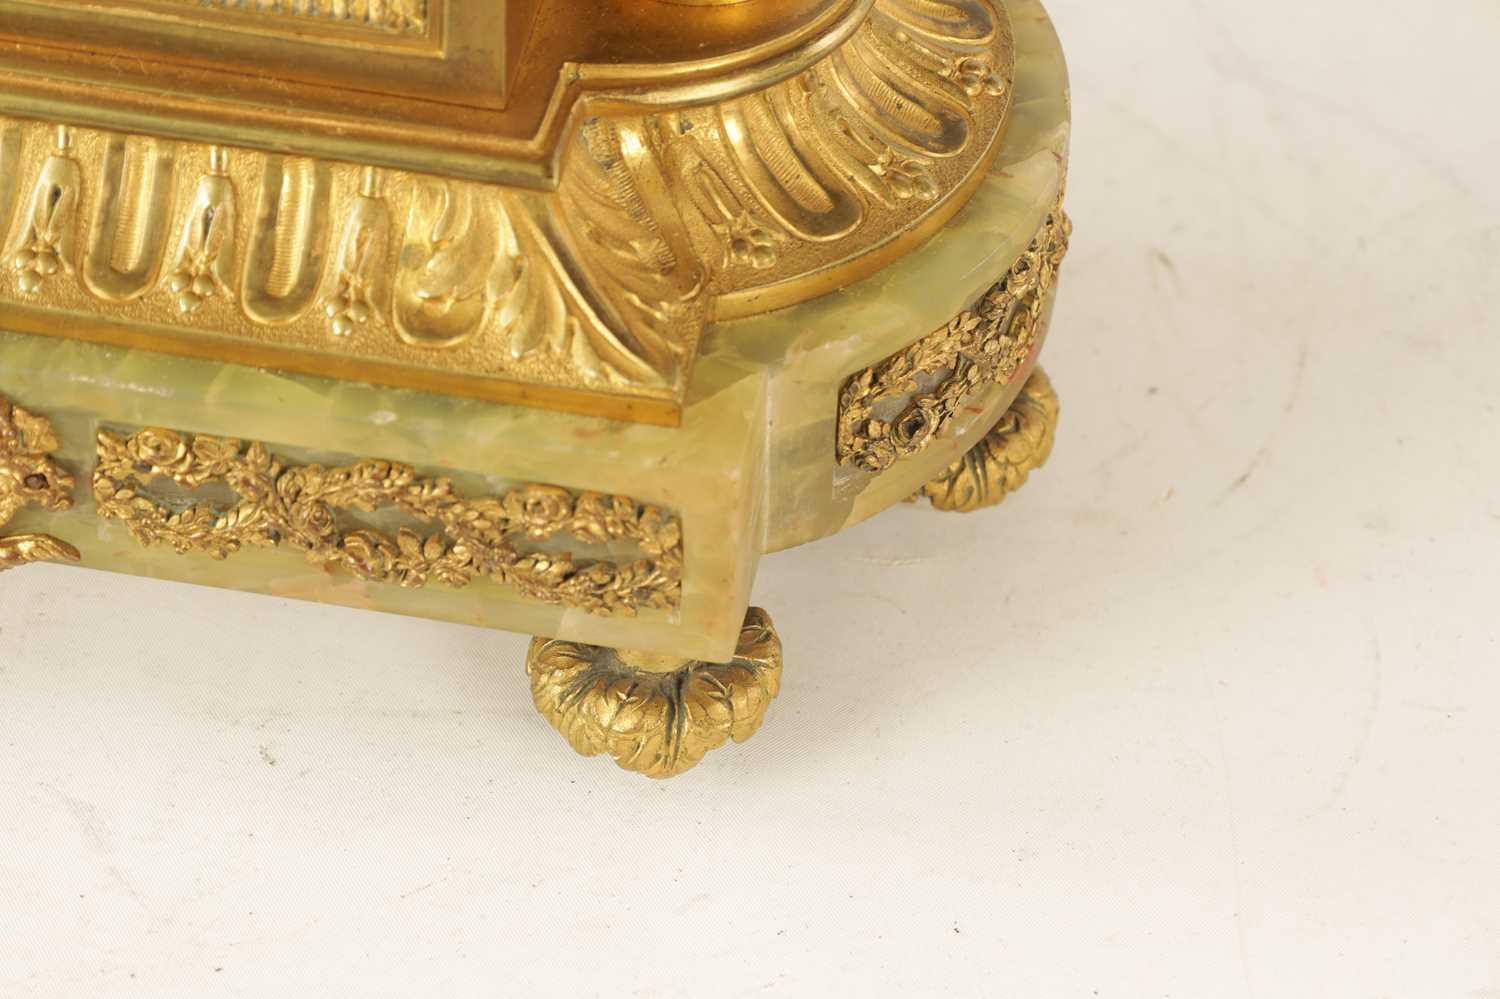 A LATE 19TH CENTURY FRENCH ORMOLU AND ONYX MANTEL CLOCK - Image 6 of 12